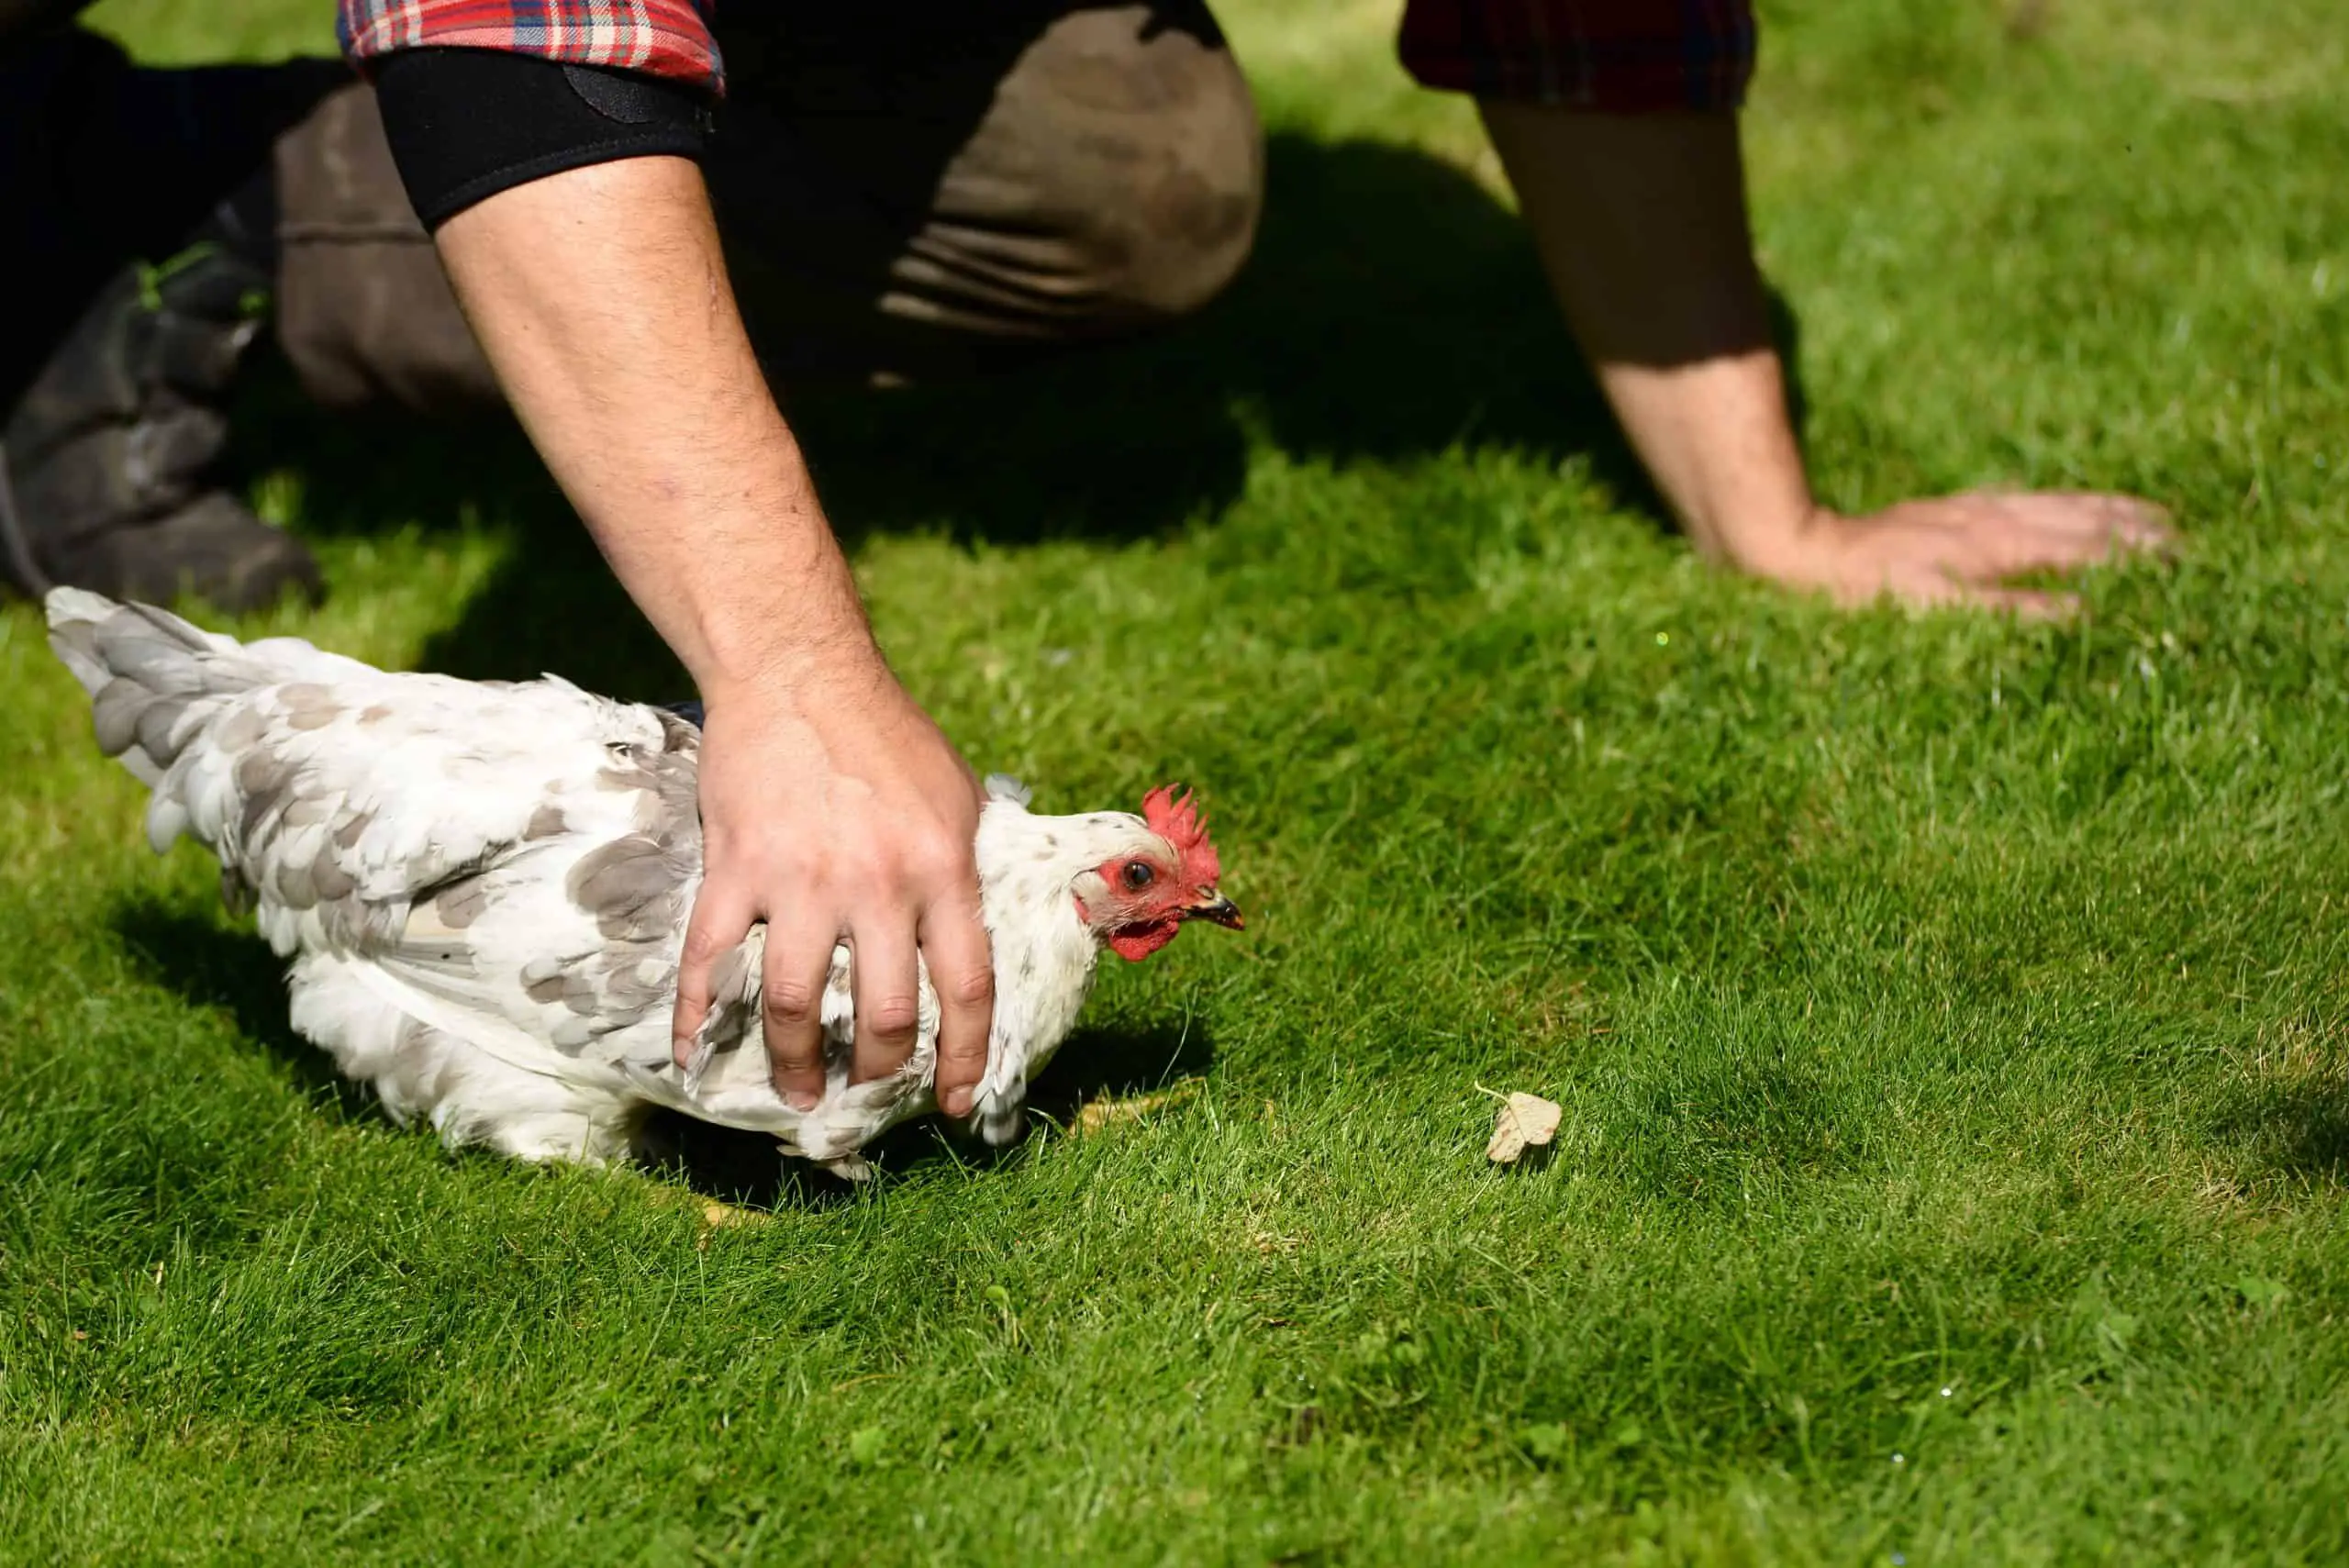 Both humans and hens need to be careful within a garden sprayed with a weed killer